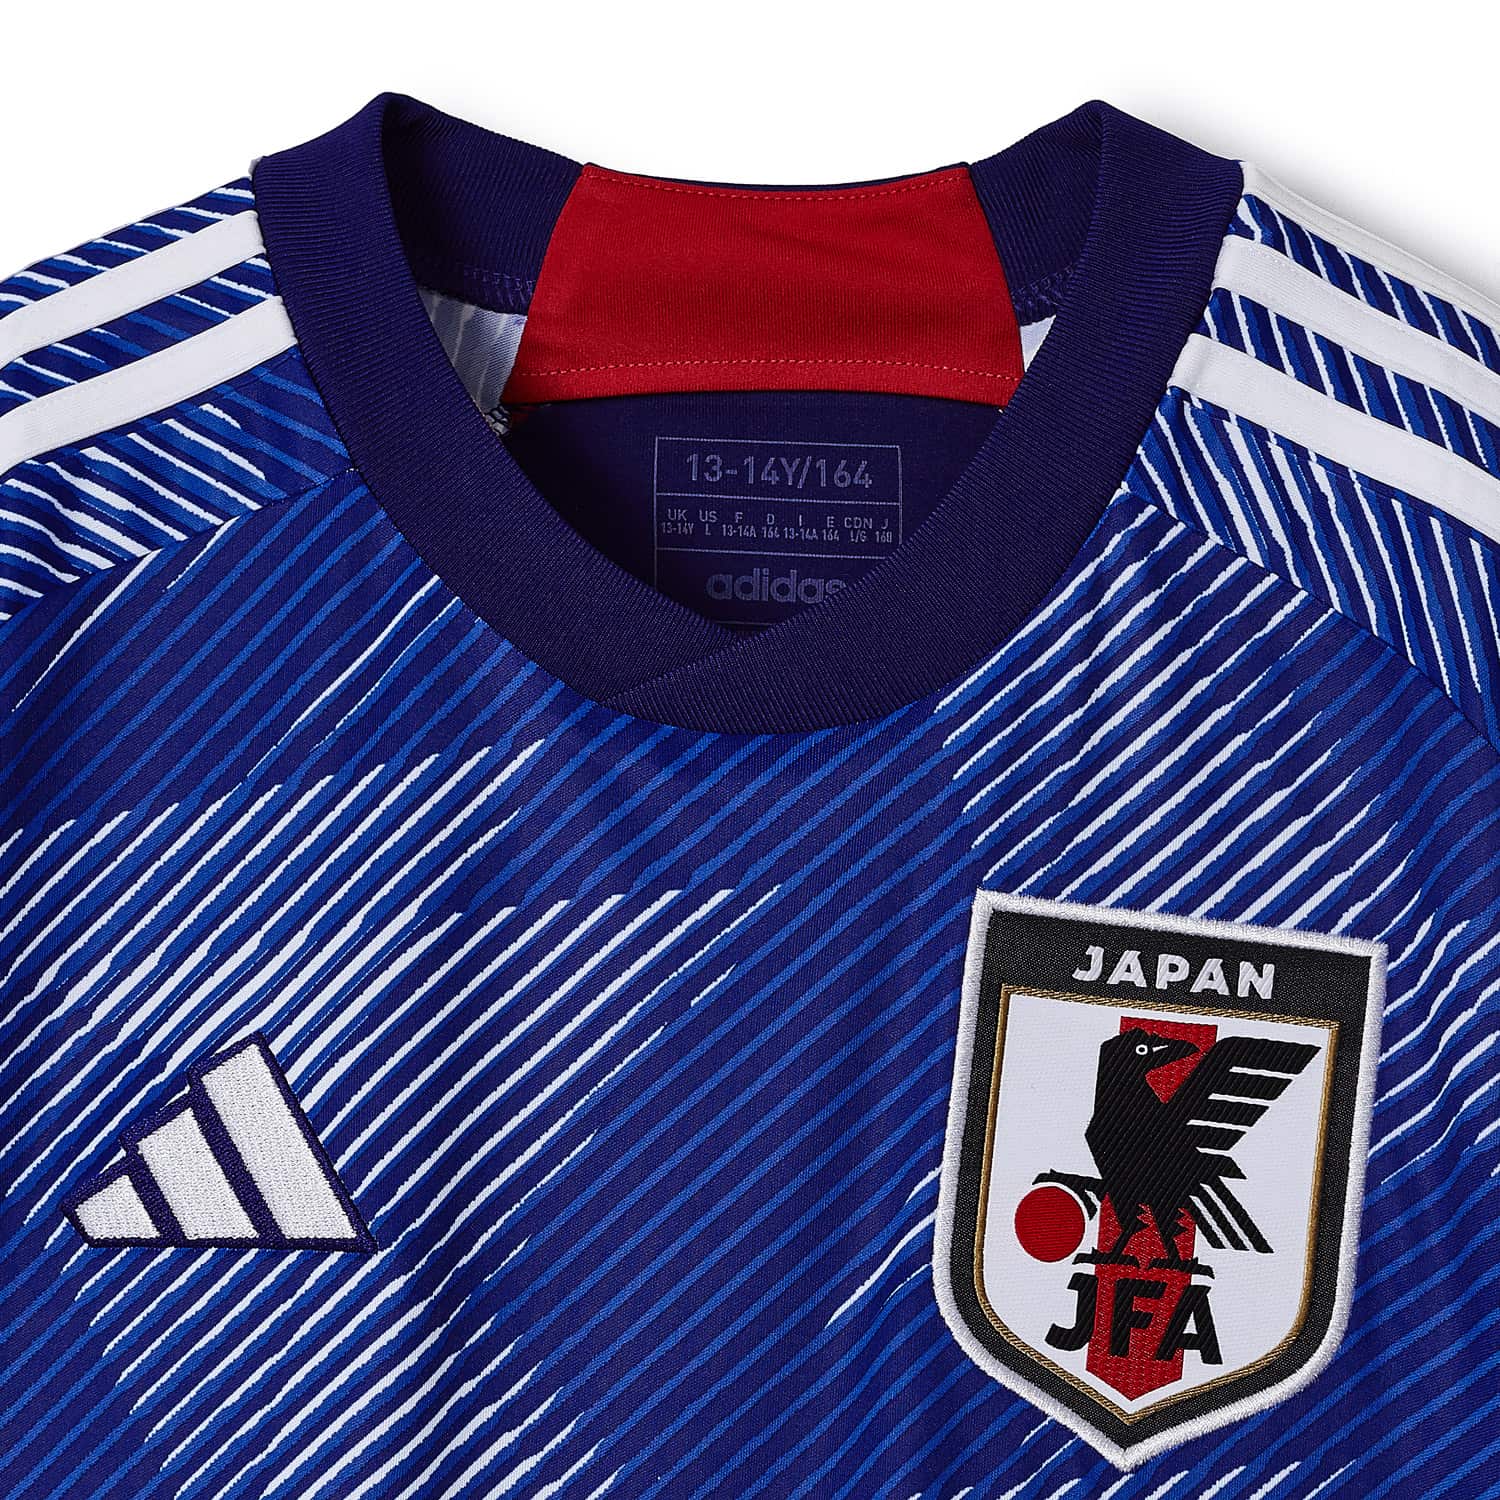 Kids Japan Special Edition Anime Football Jersey And Shorts.